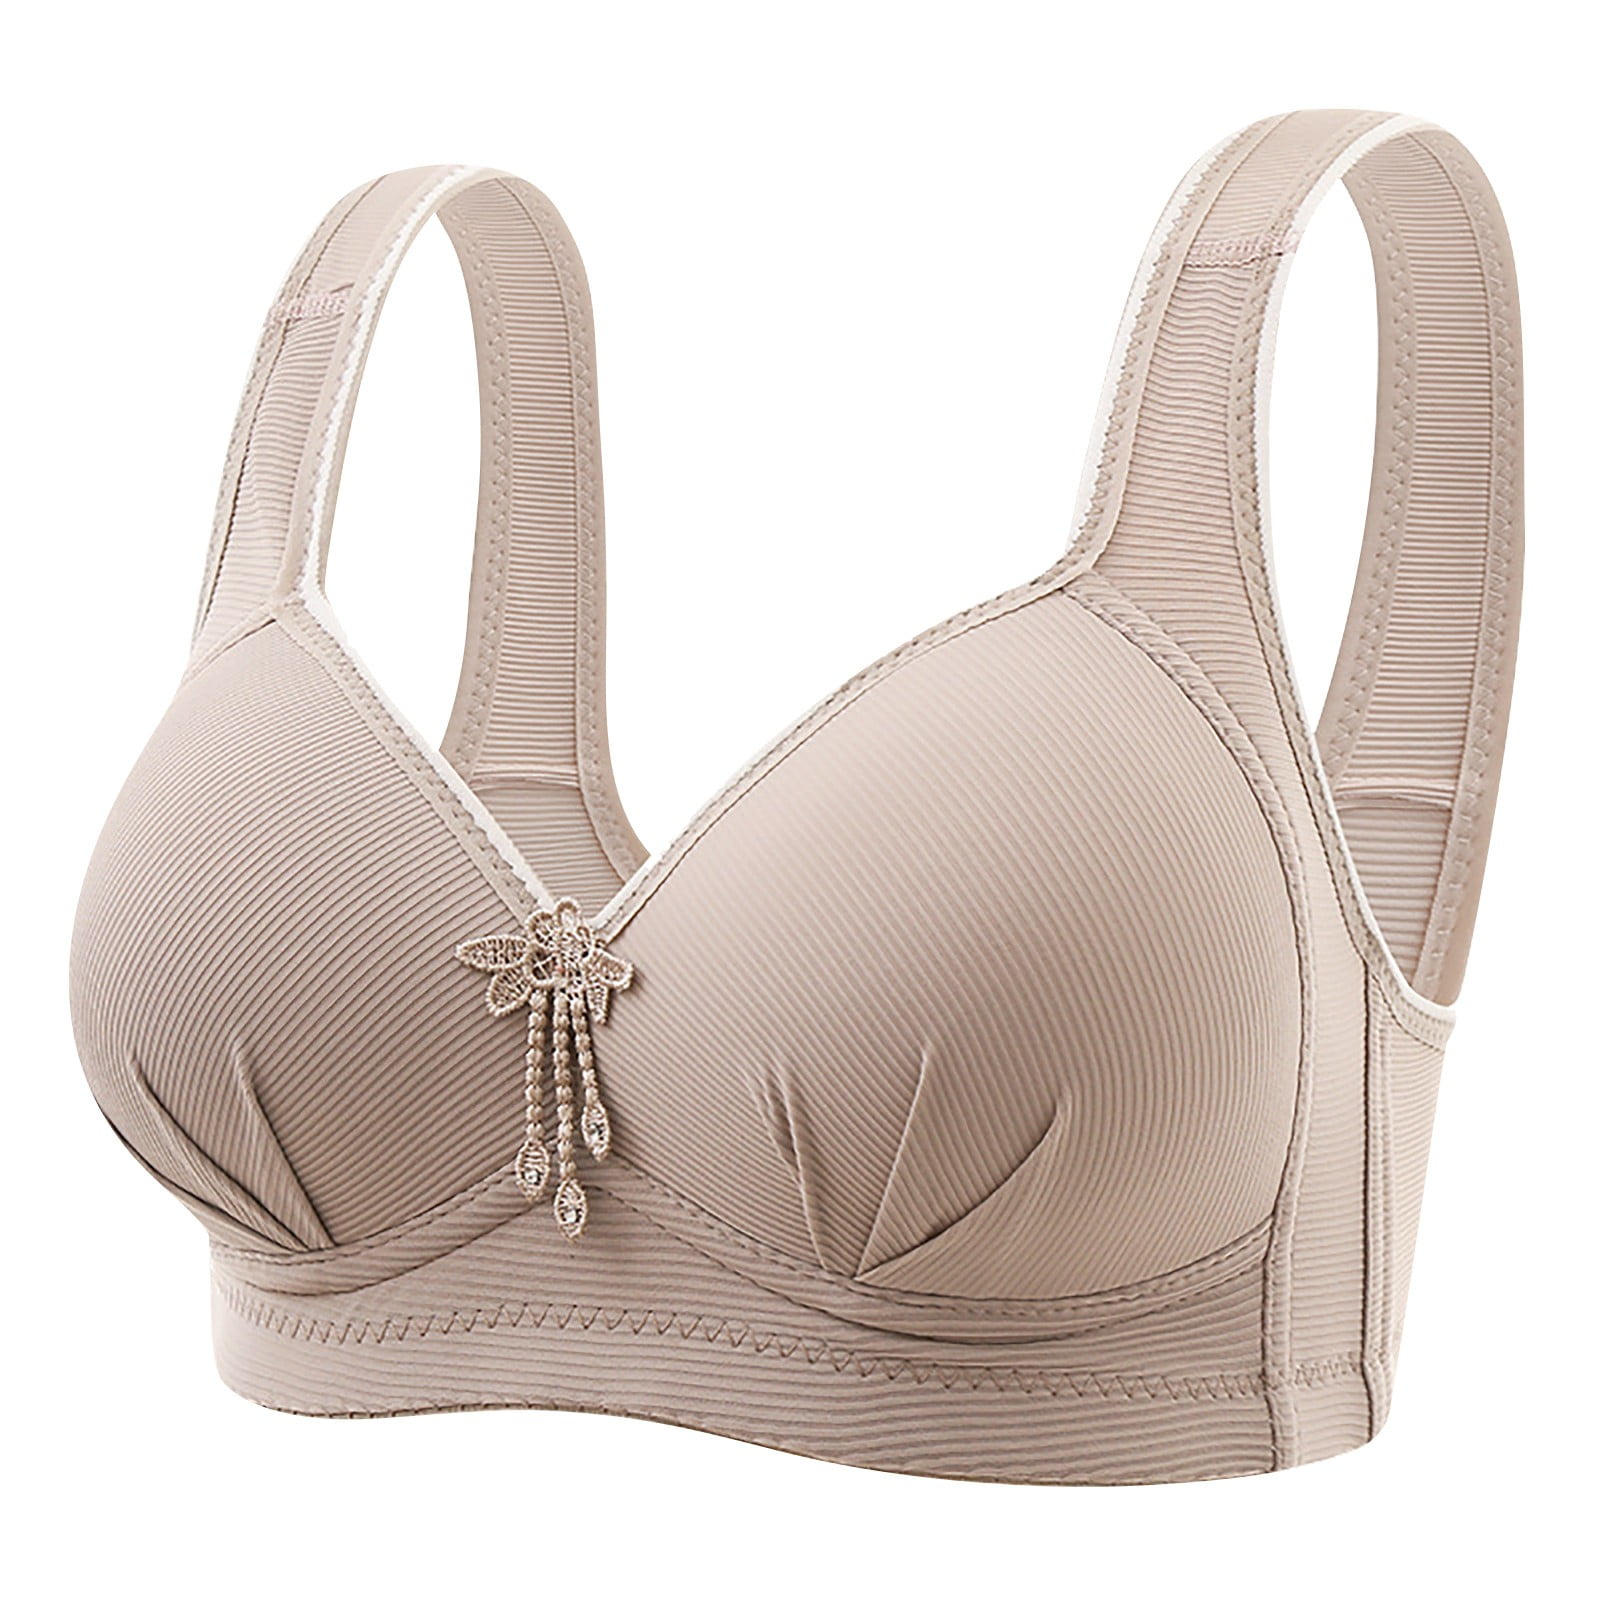  Bras - Lingerie: Clothing, Shoes & Jewelry: Everyday Bras,  Sports Bras, Adhesive Bras, Minimizers & More